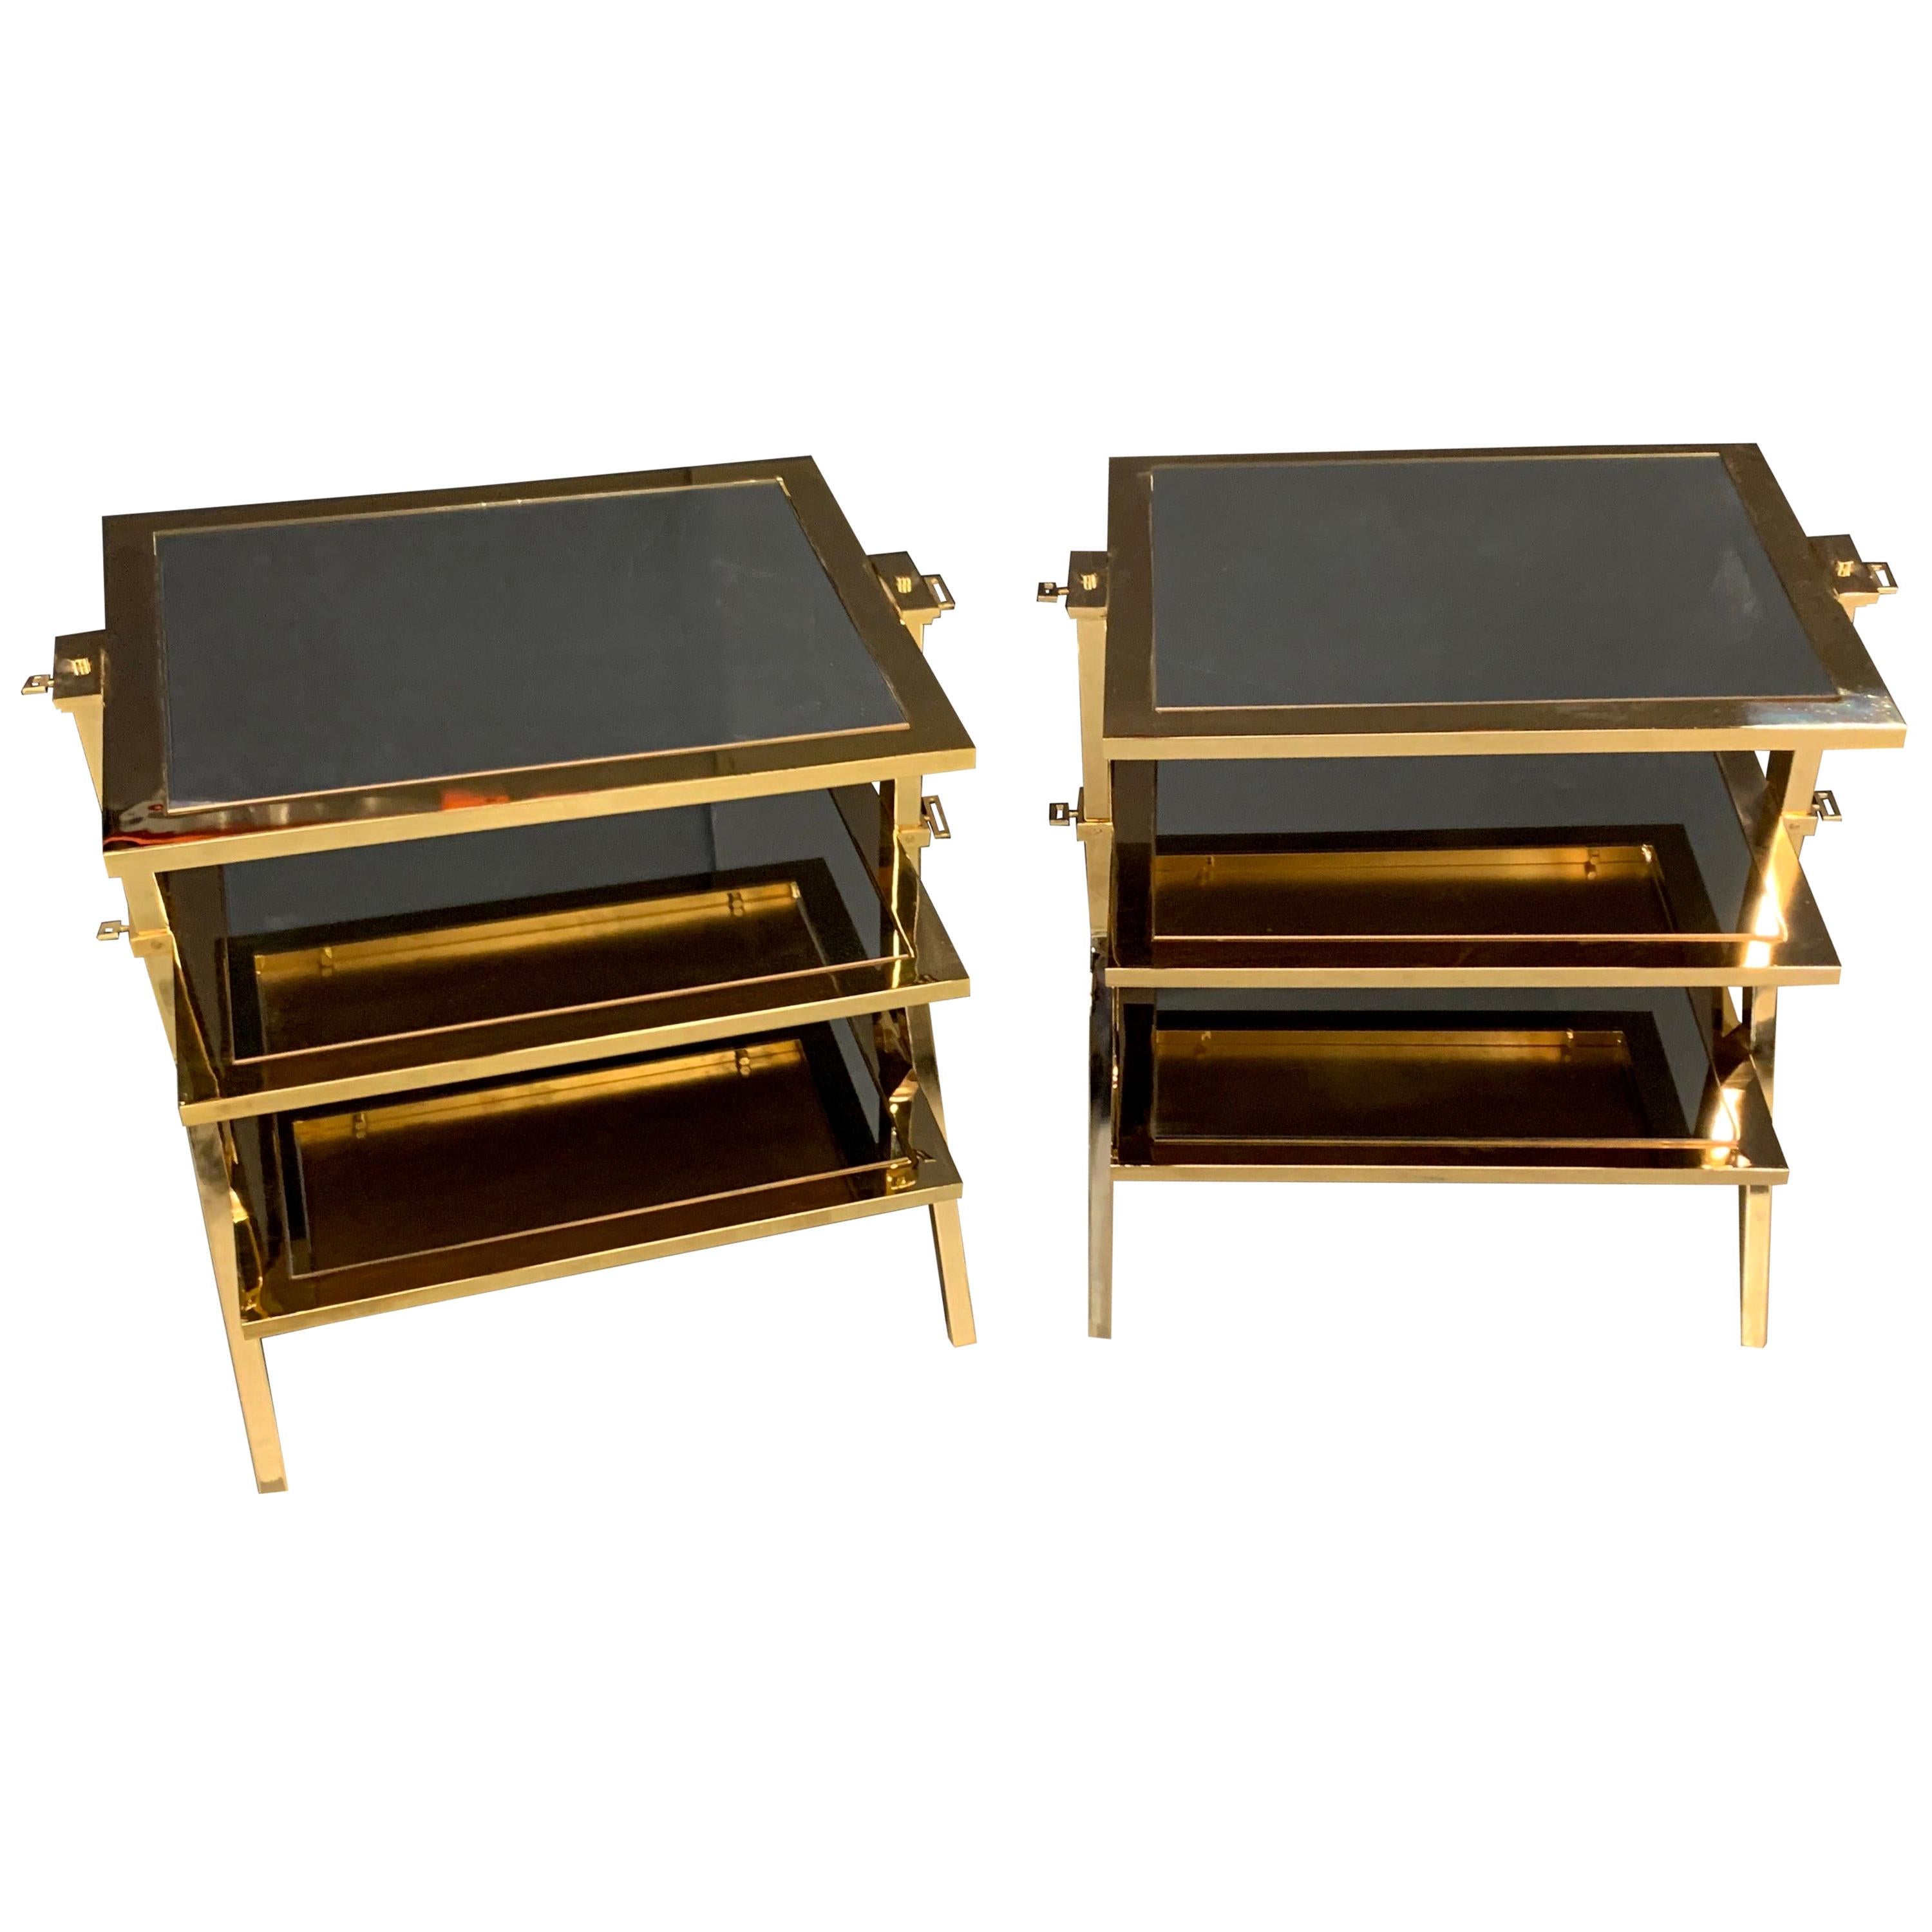 Wonderful Pair of Lorin Marsh Polished Brass and Mirror Three-Tier Side Tables